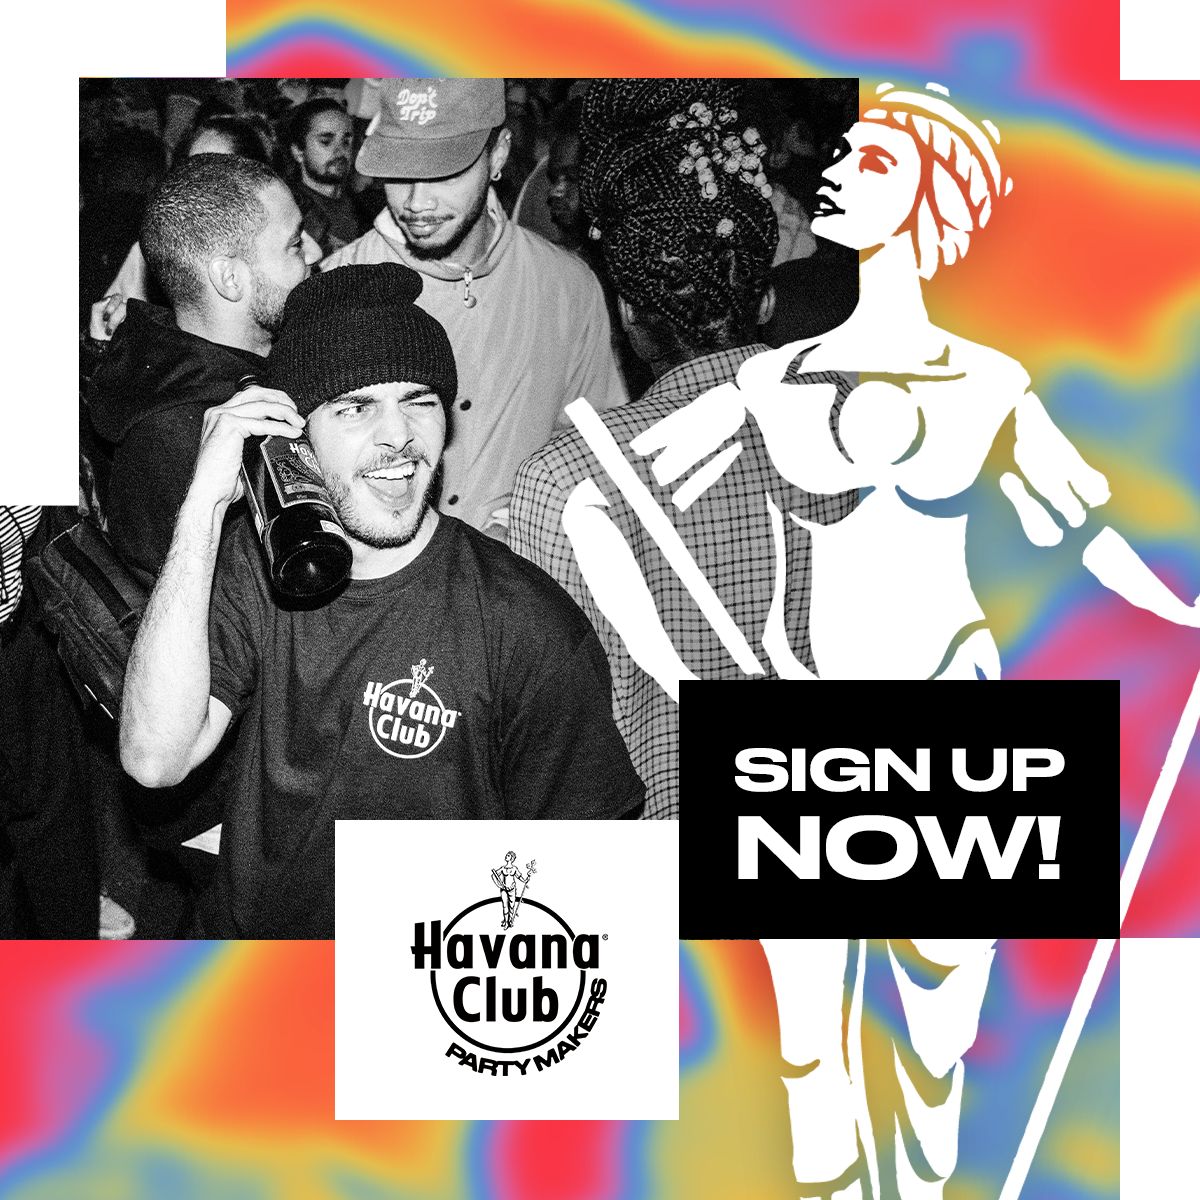 Havana Club Are on the Hunt for the next Generation of Party Makers